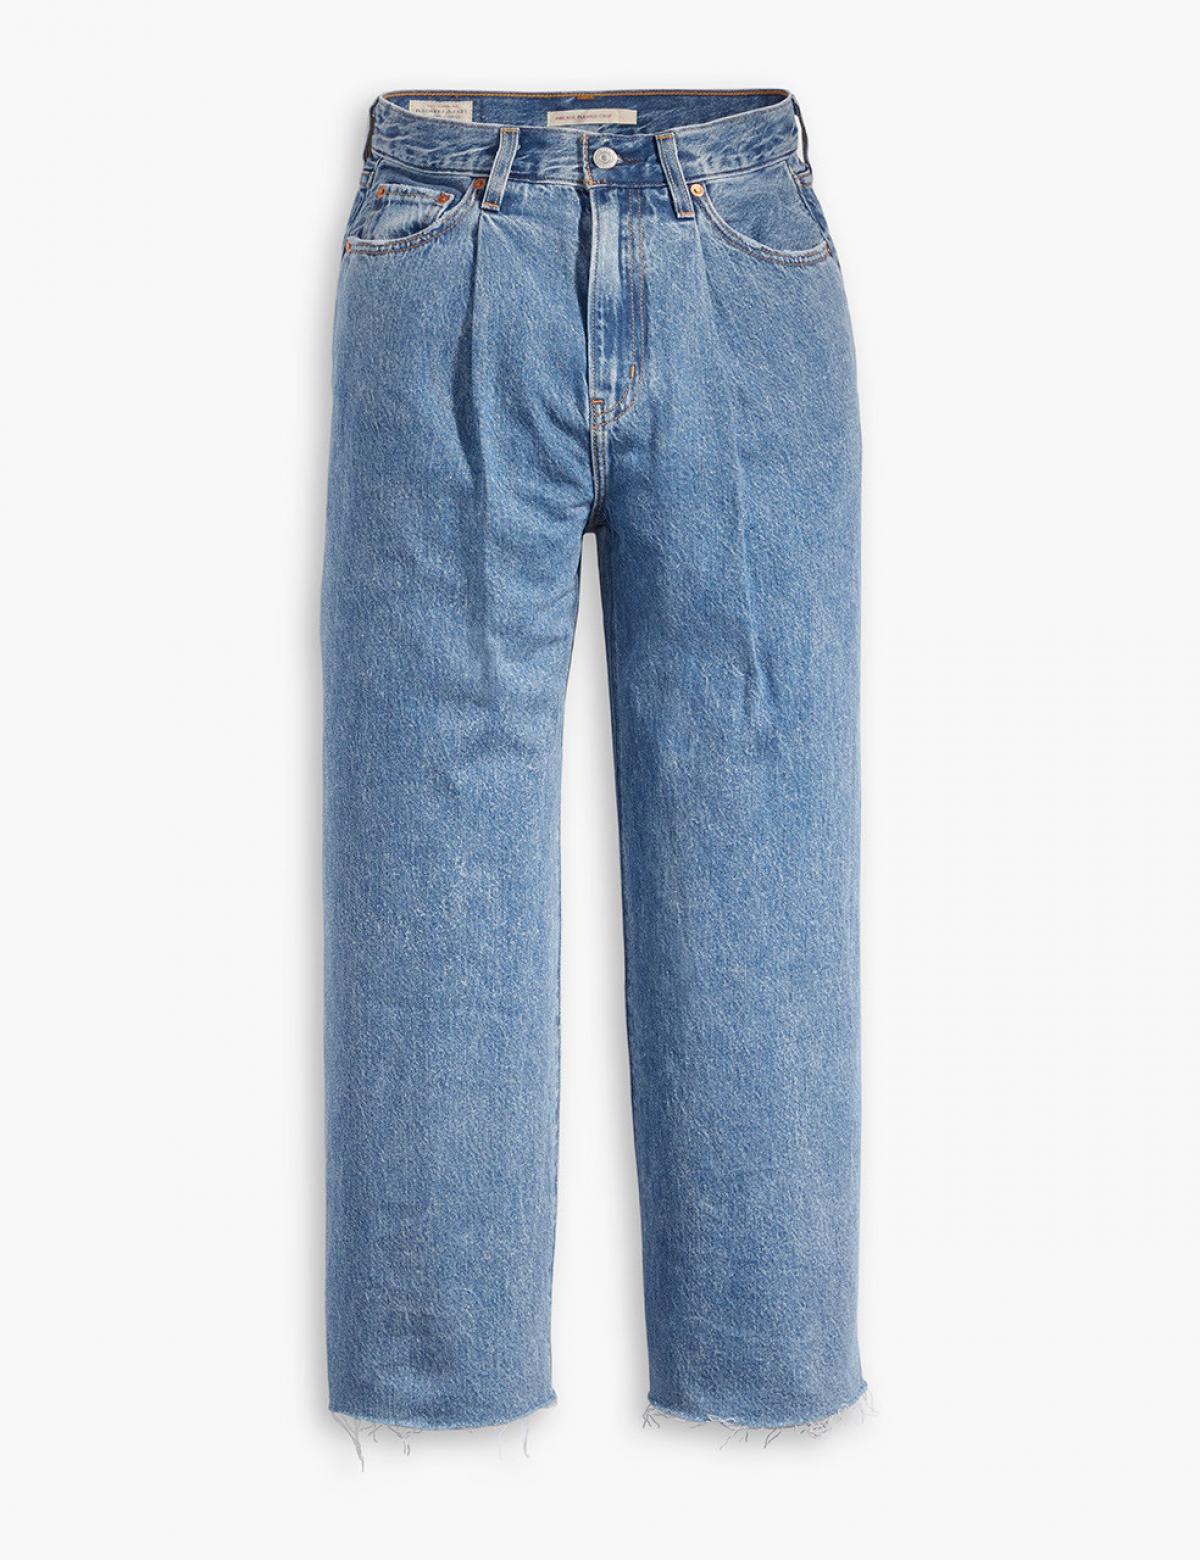 TREND 1: All Rise, high-waisted jeans